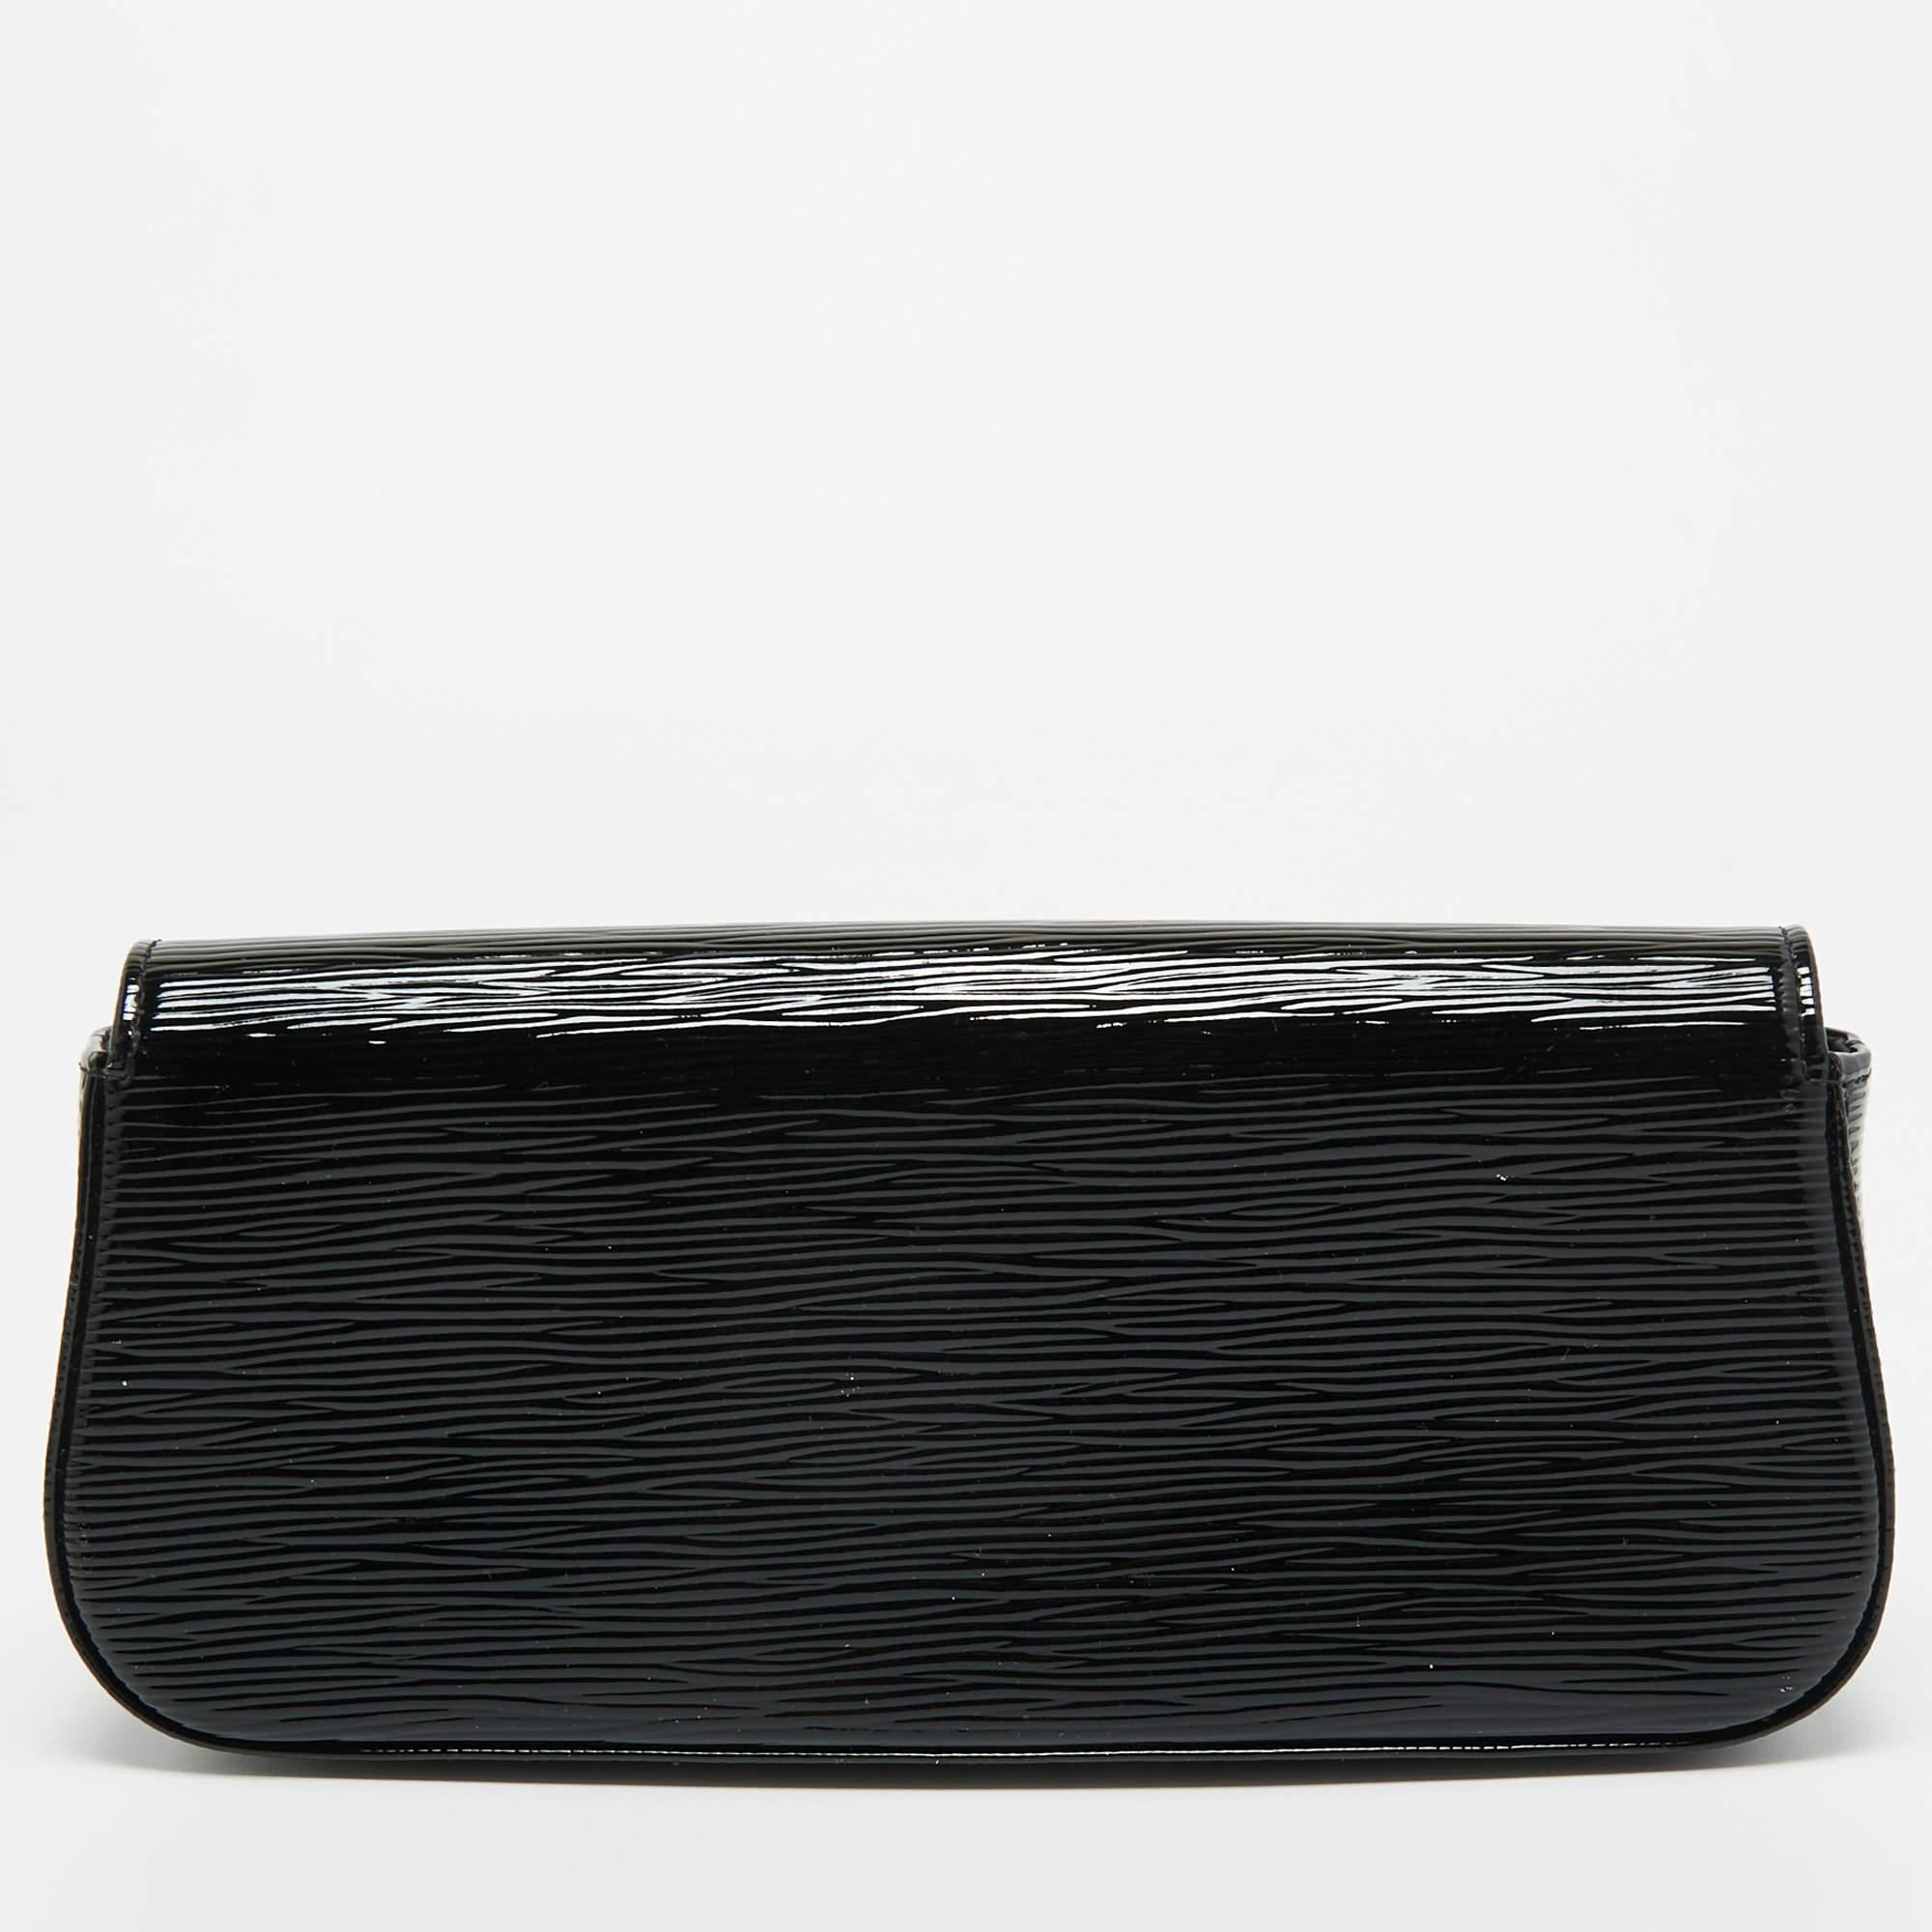 Well-crafted and overflowing with style, this Sobe clutch is from Louis Vuitton. It has a luxe exterior, a roomy interior, and a large LV adorned on the flap. This creation will complement all your dresses and elegant outfits.

Includes: Original